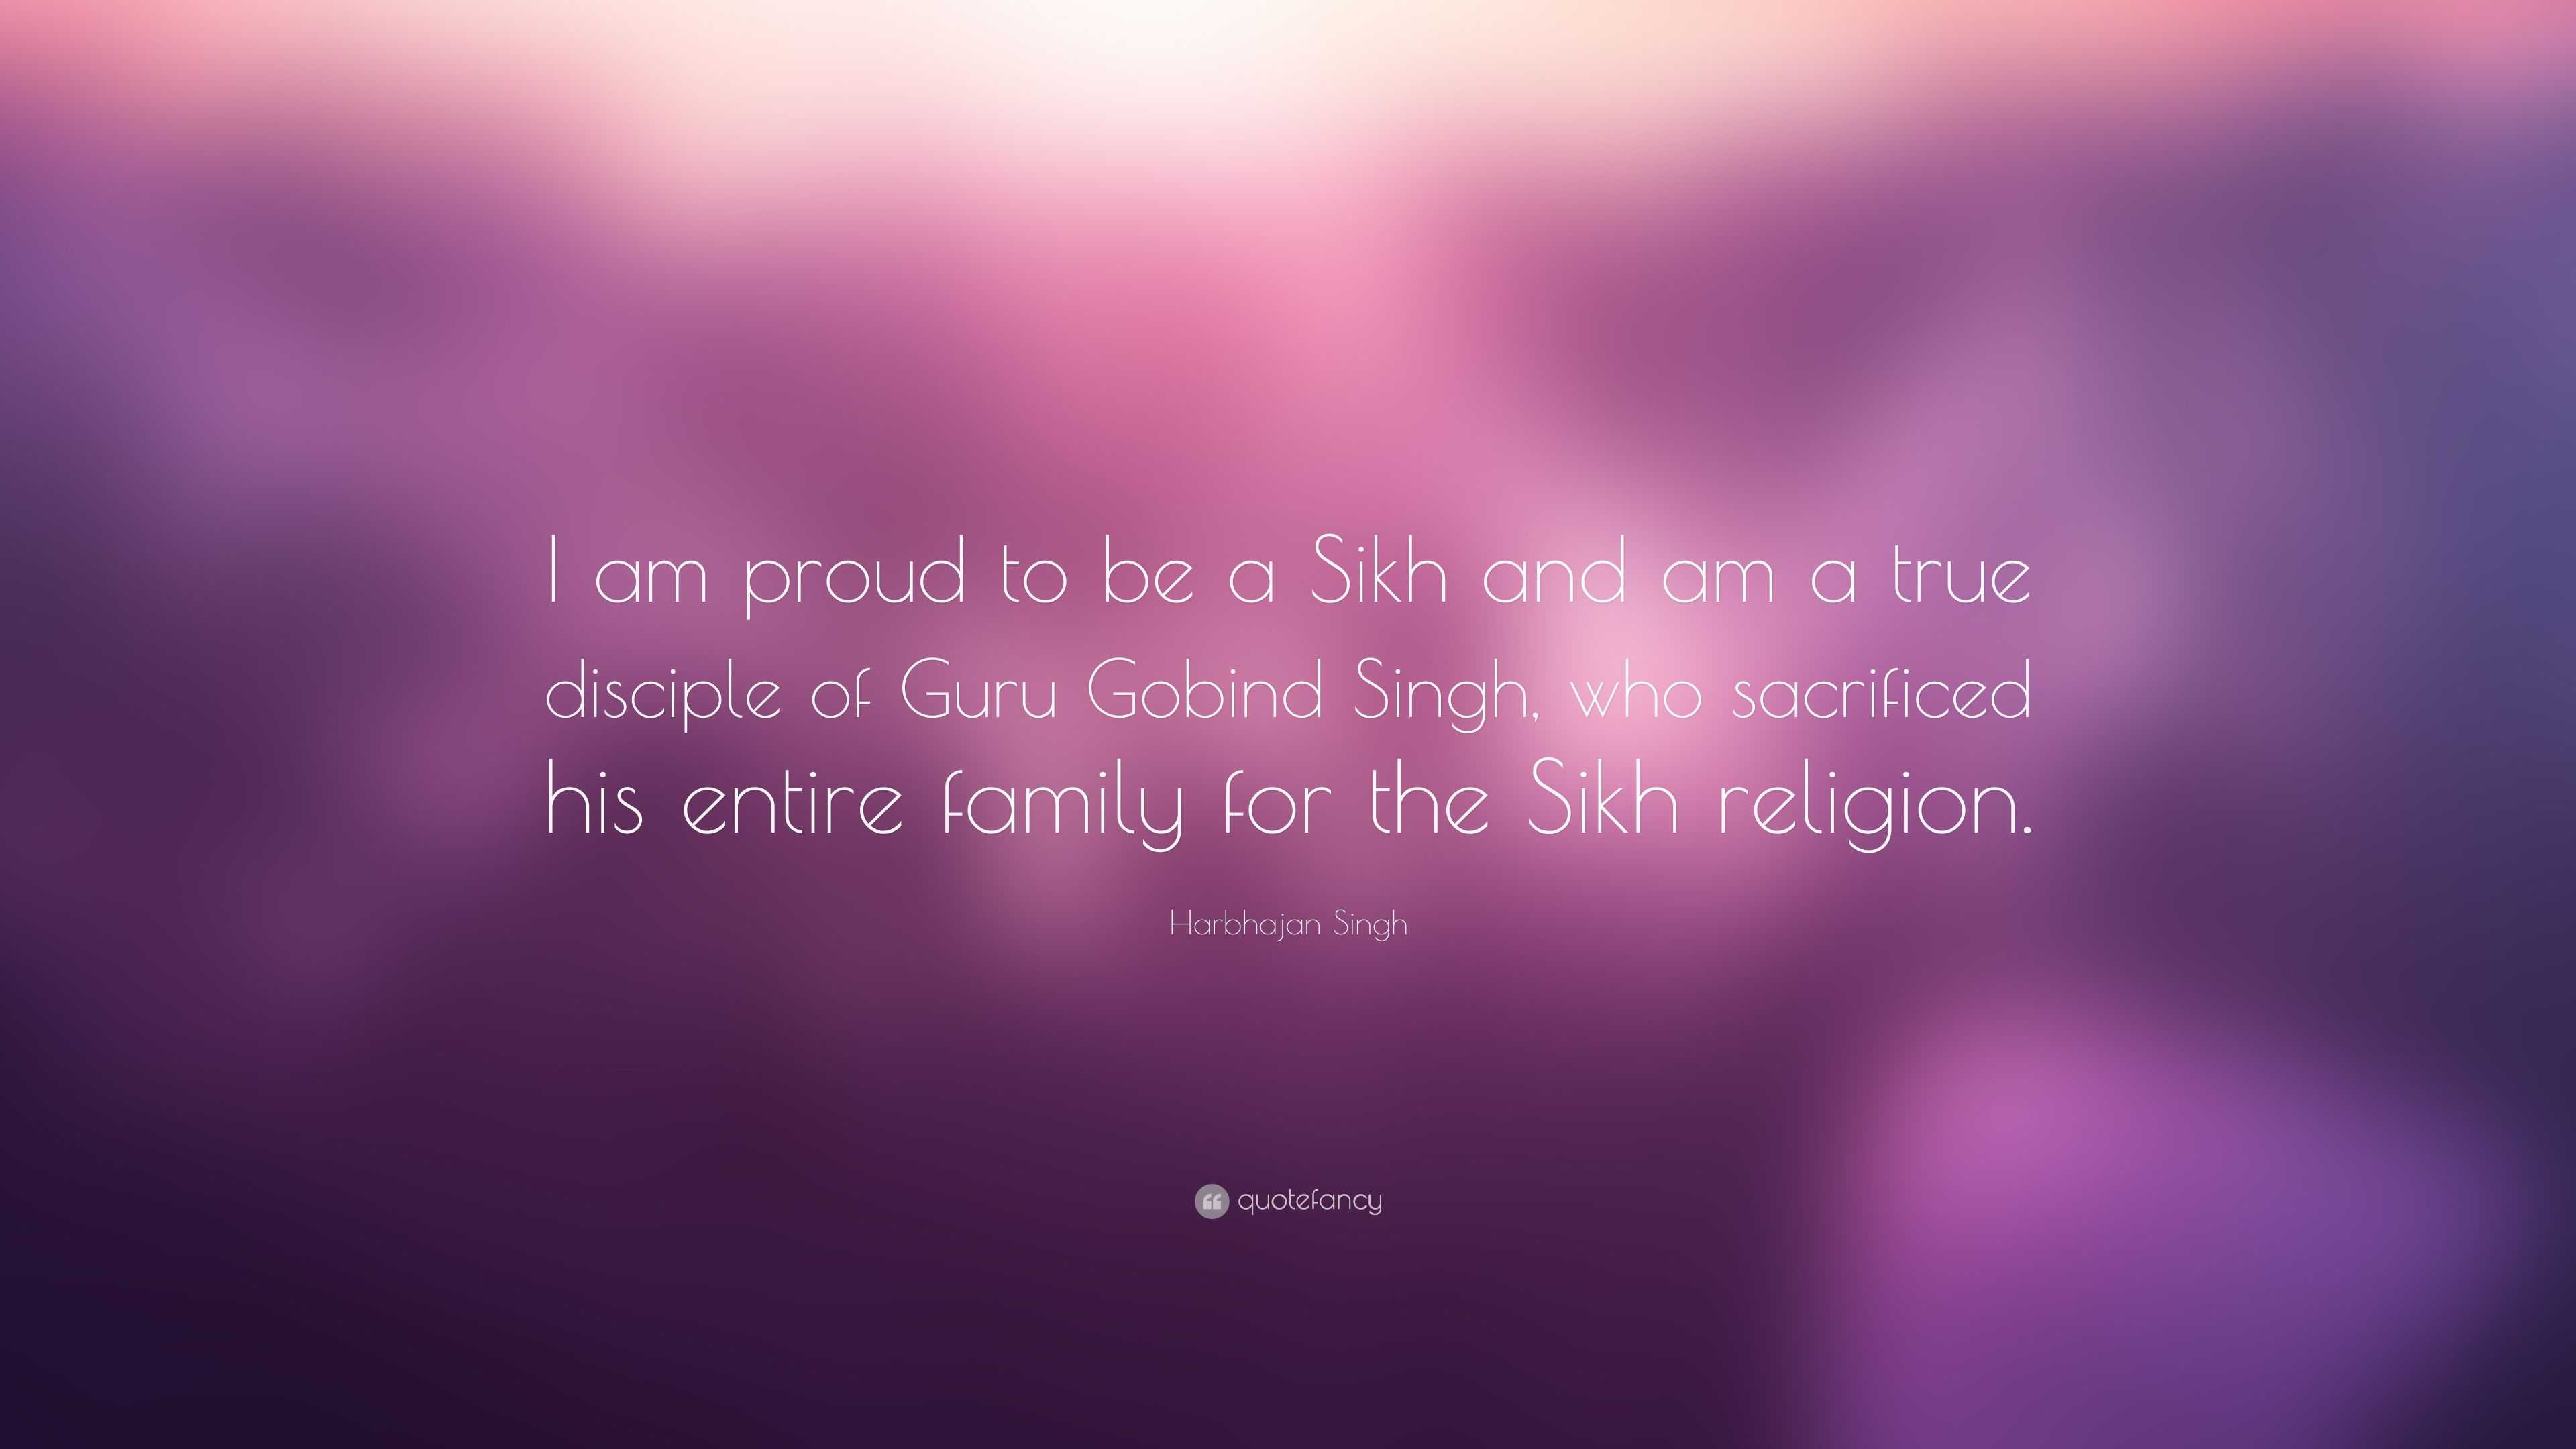 Harbhajan Singh Quote: “I am proud to be a Sikh and am a ...
 True Sikh Quotes